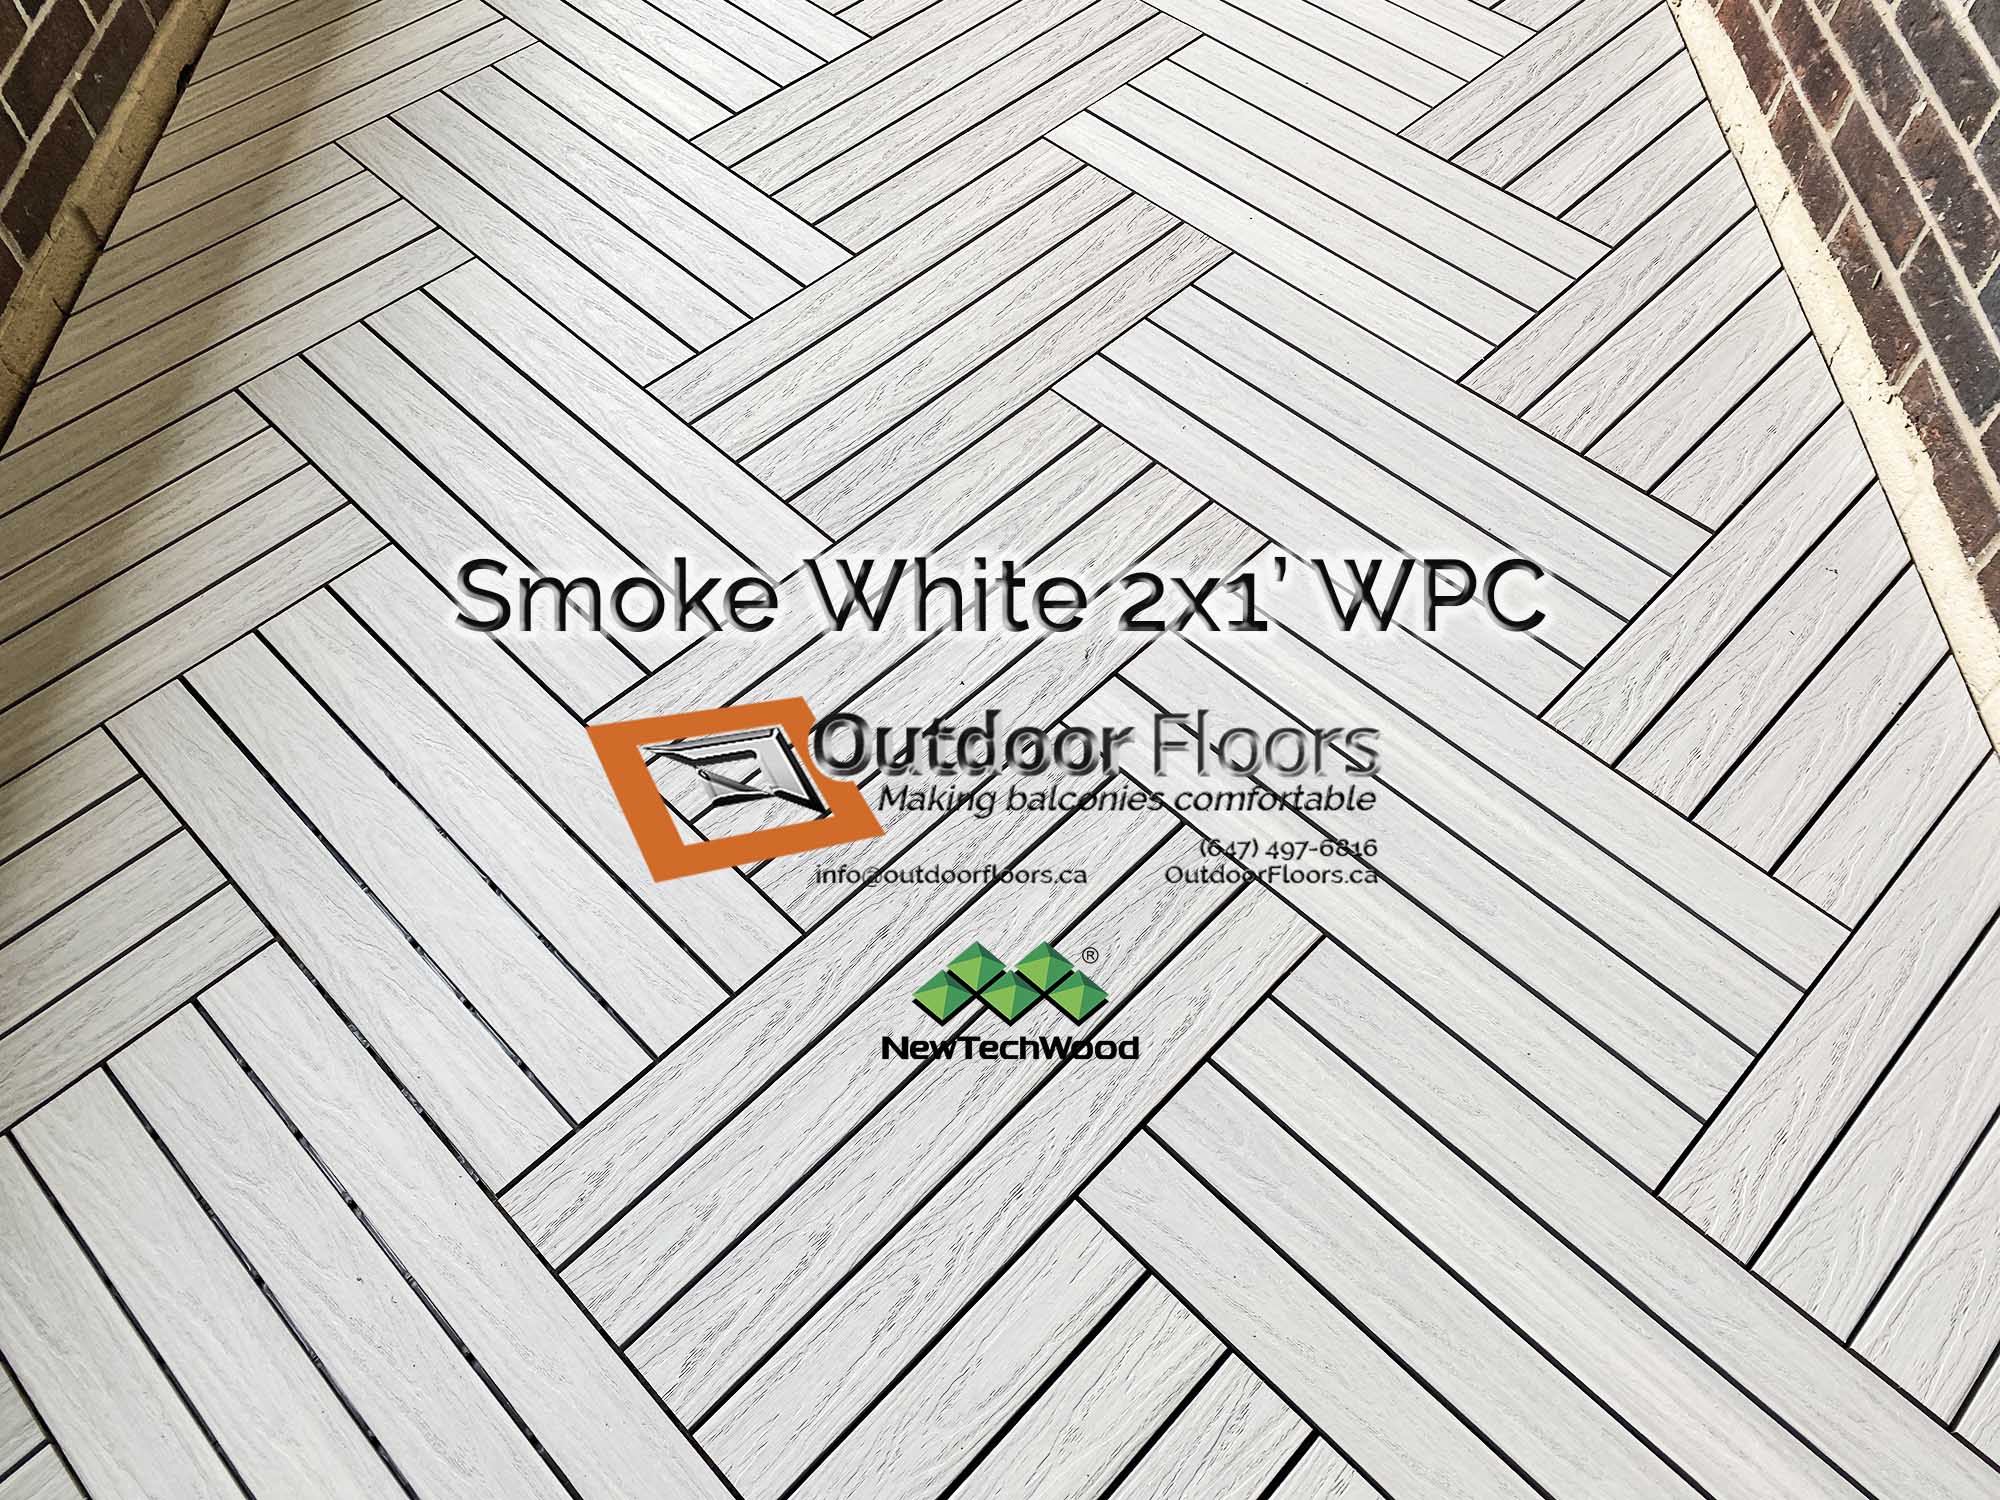 Smoke white deck tiles are a very light shade of grey